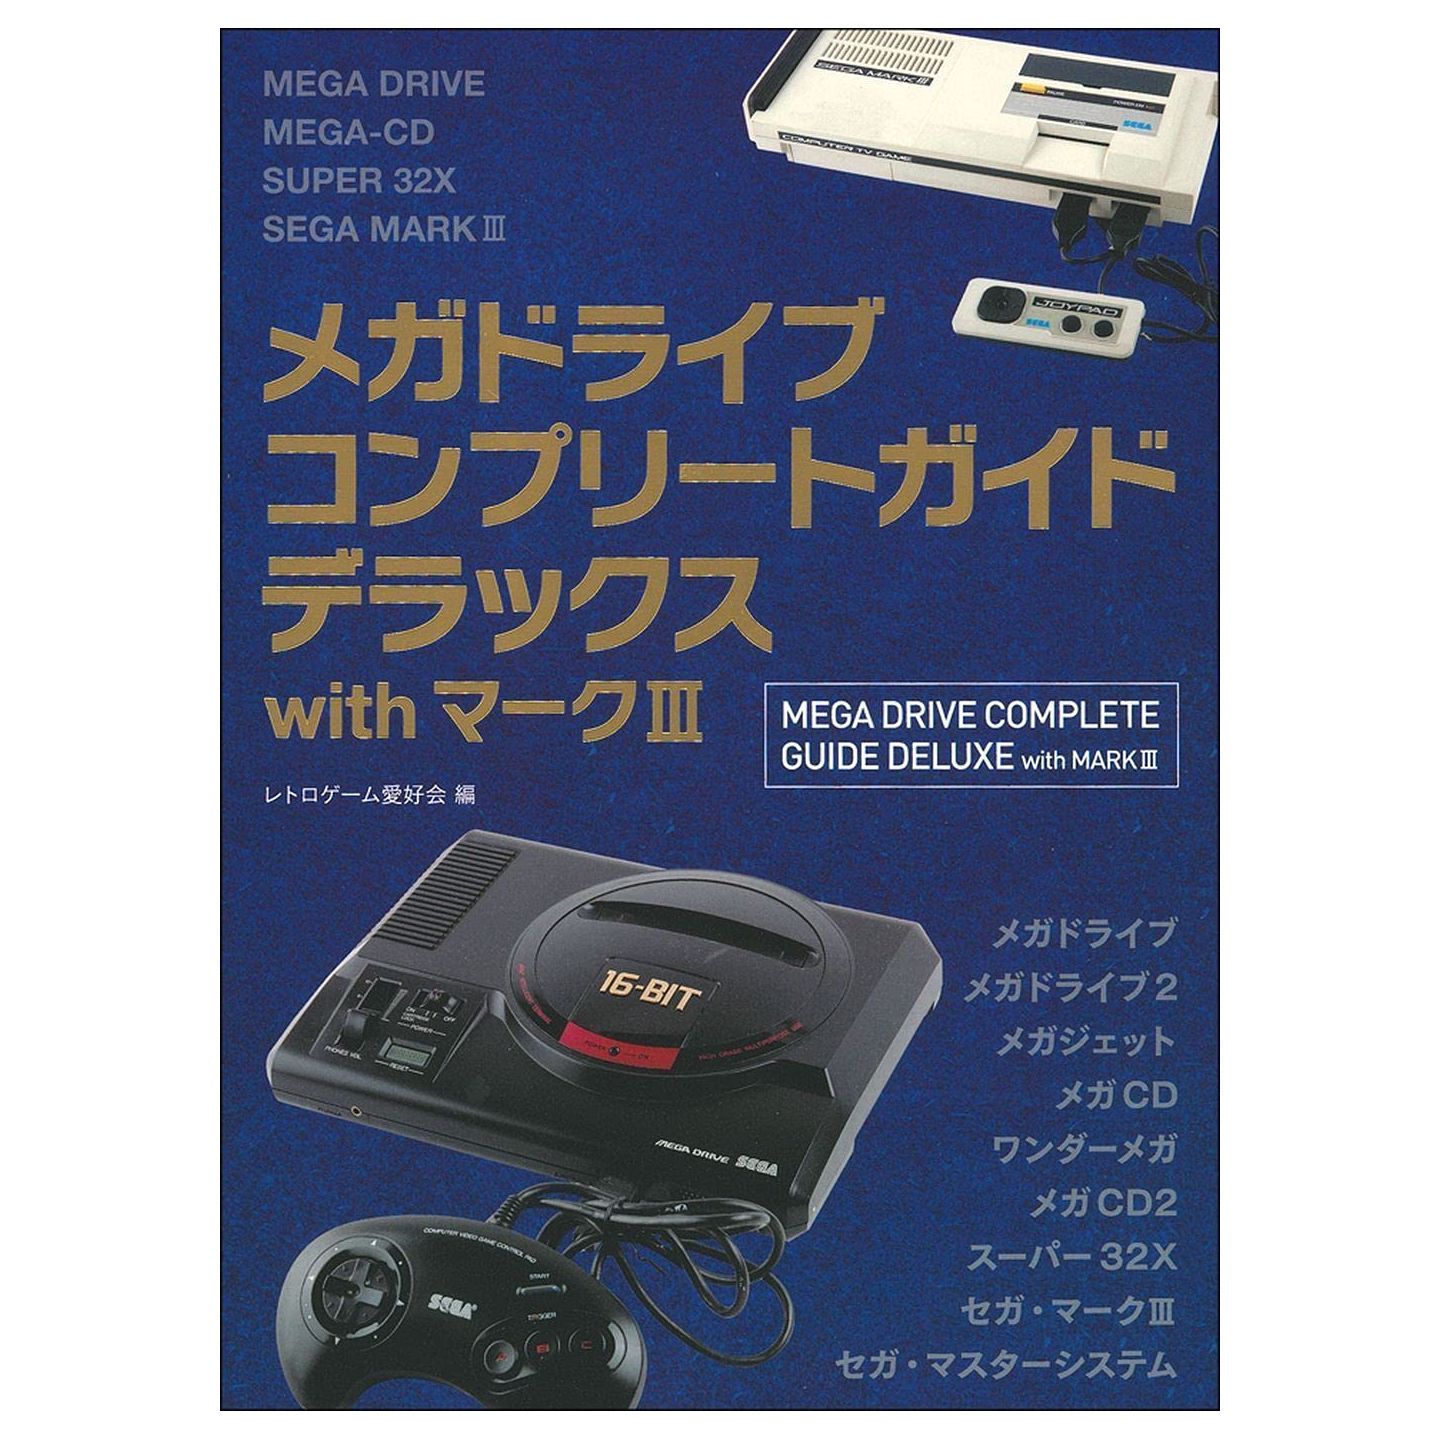 Mook Megadrive Complete Guide Deluxe